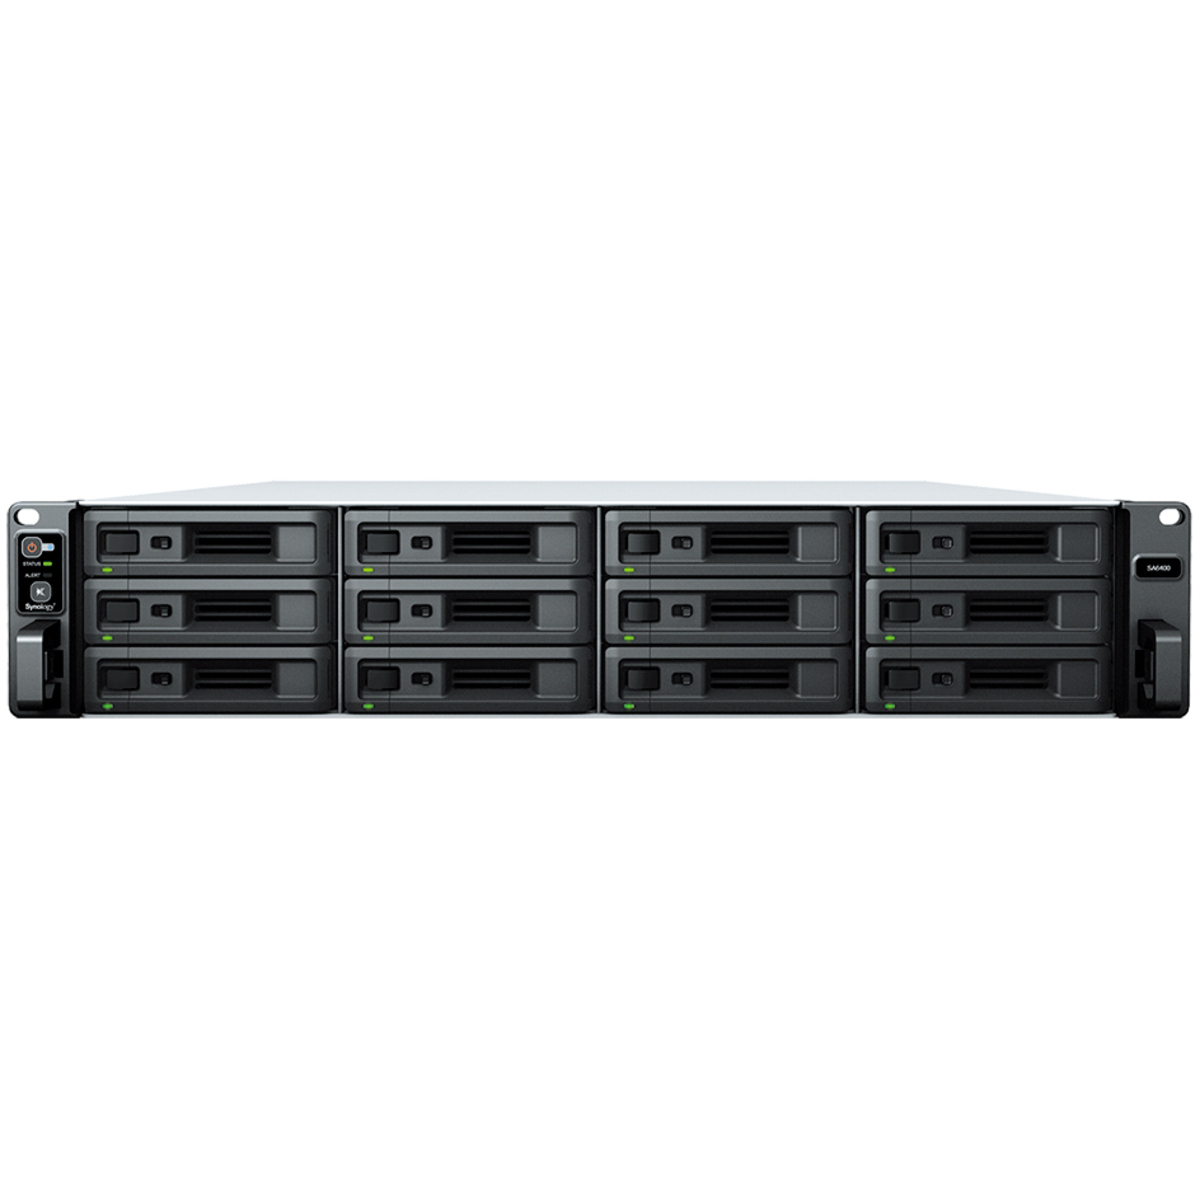 Synology RackStation SA6400 288tb 12-Bay RackMount Large Business / Enterprise NAS - Network Attached Storage Device 12x24tb Seagate EXOS X24 ST24000NM002H 3.5 7200rpm SATA 6Gb/s HDD ENTERPRISE Class Drives Installed - Burn-In Tested RackStation SA6400